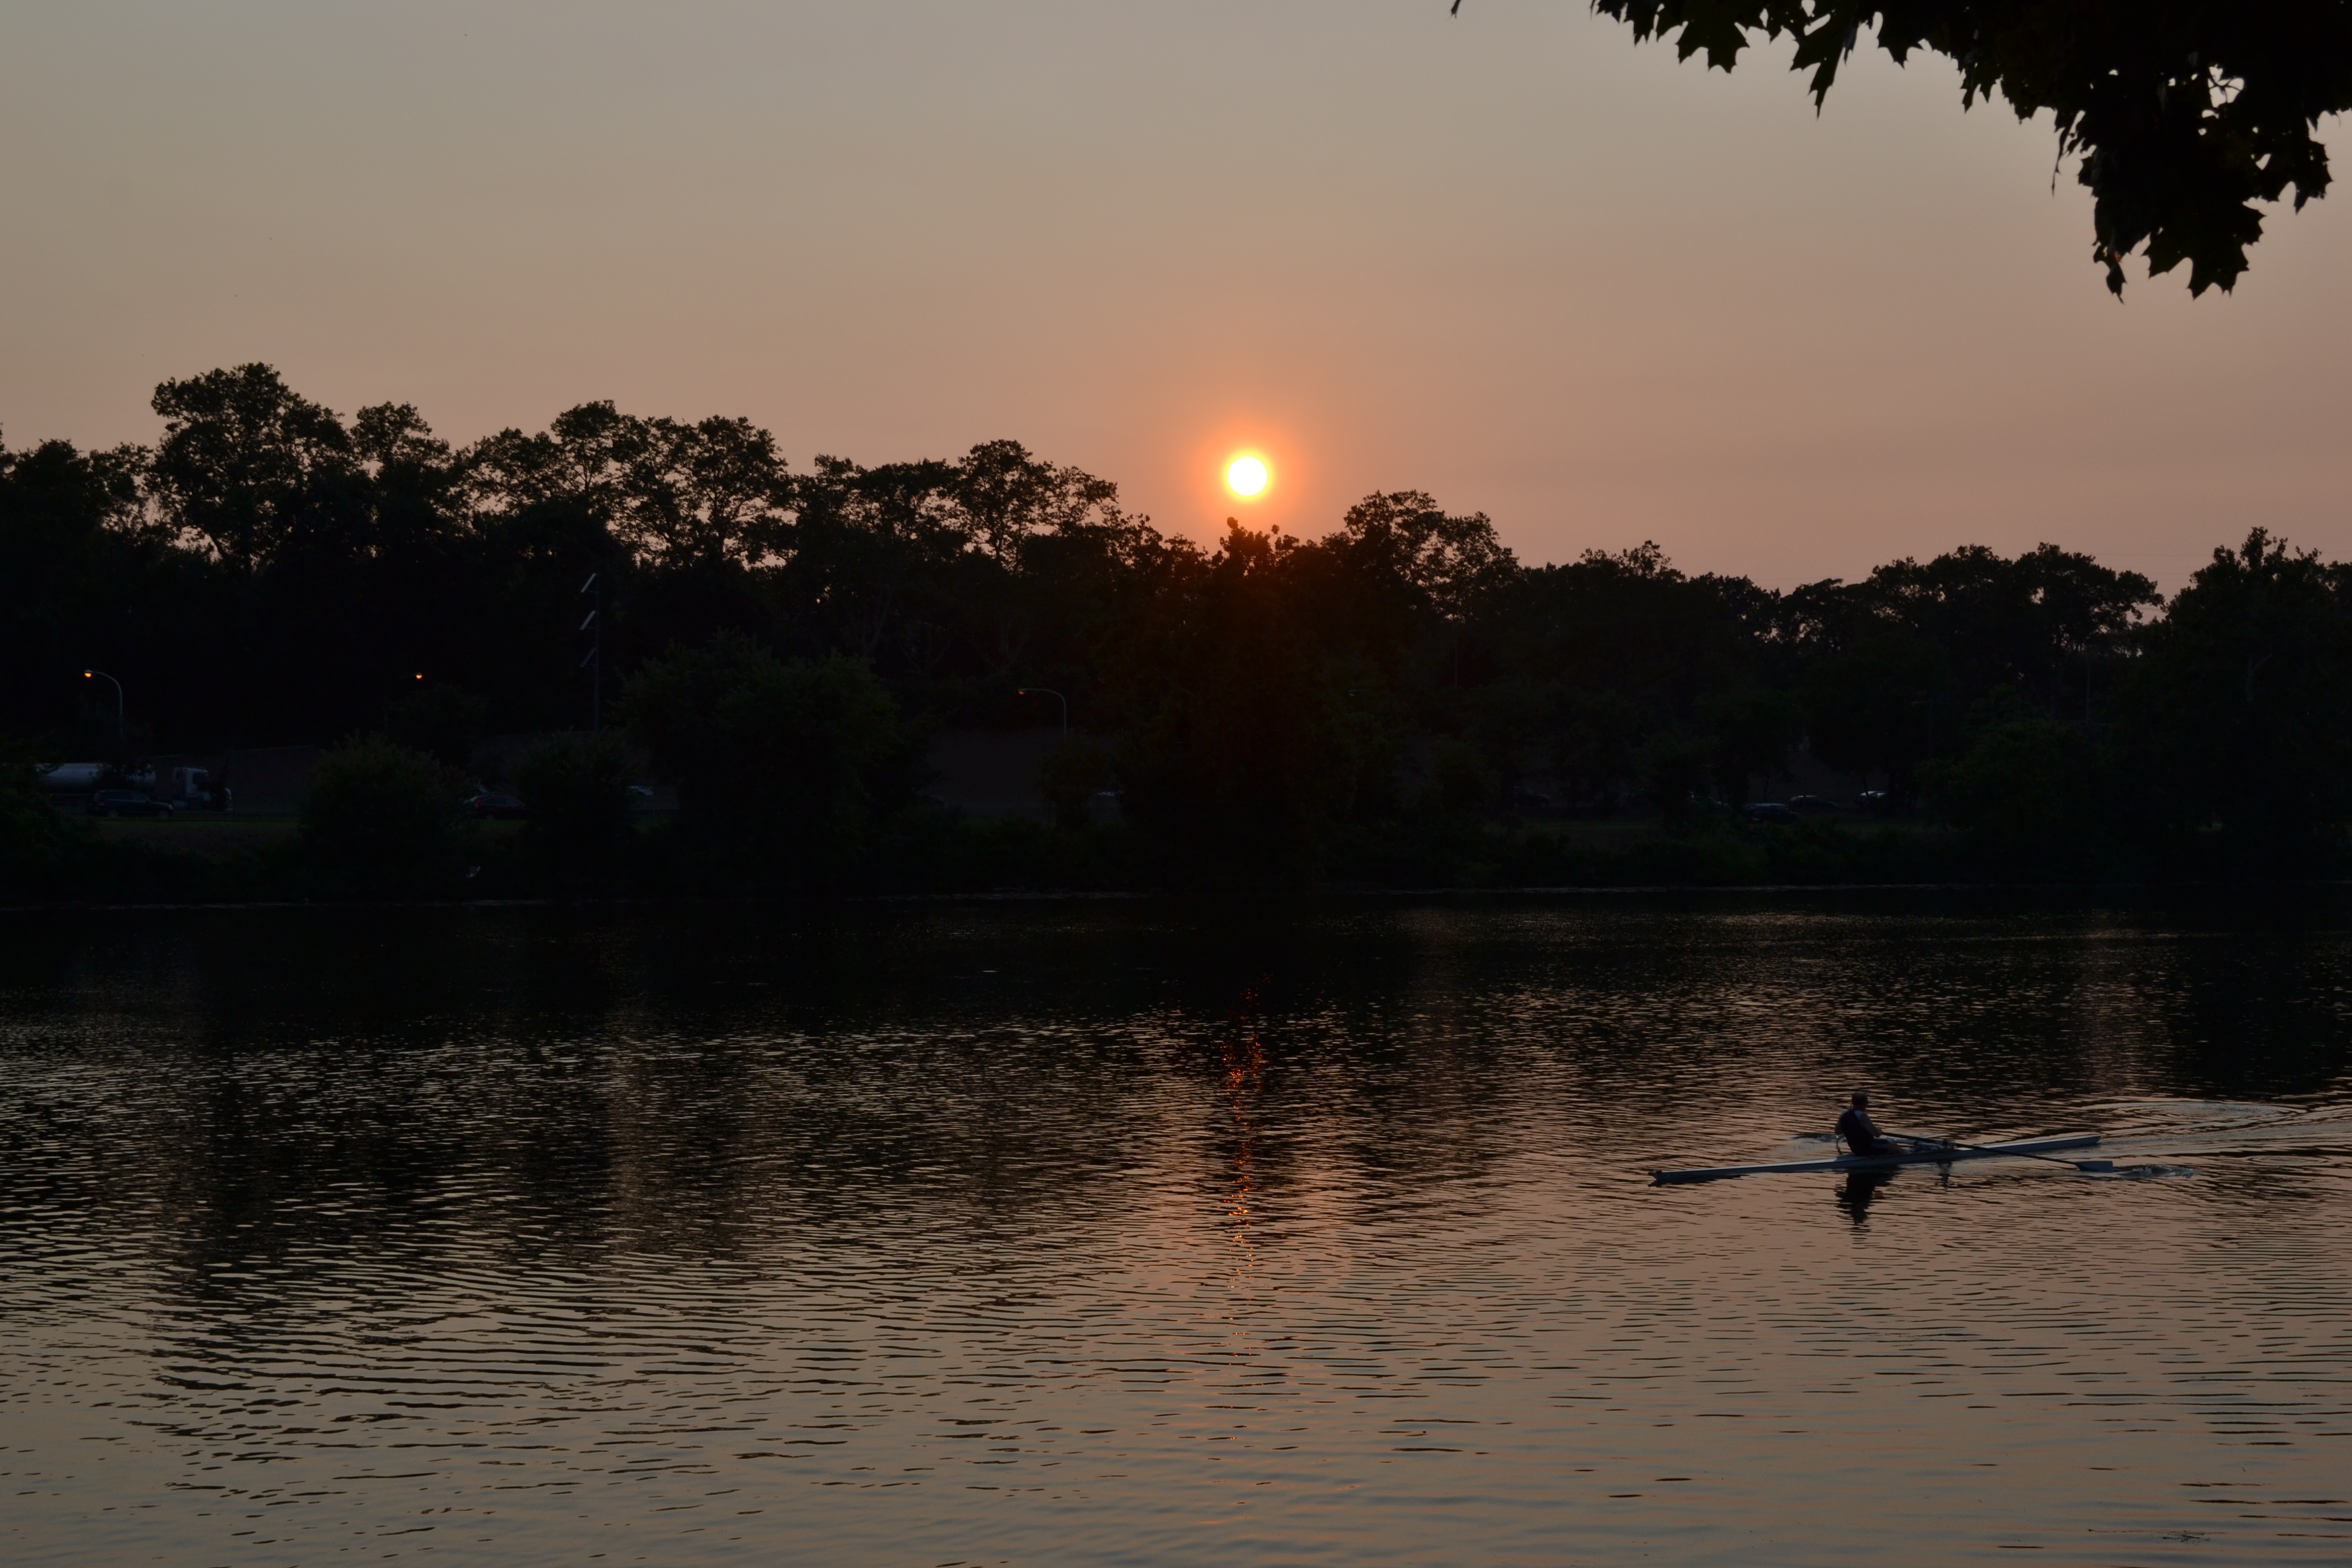 A lone rower cruised under the setting sun